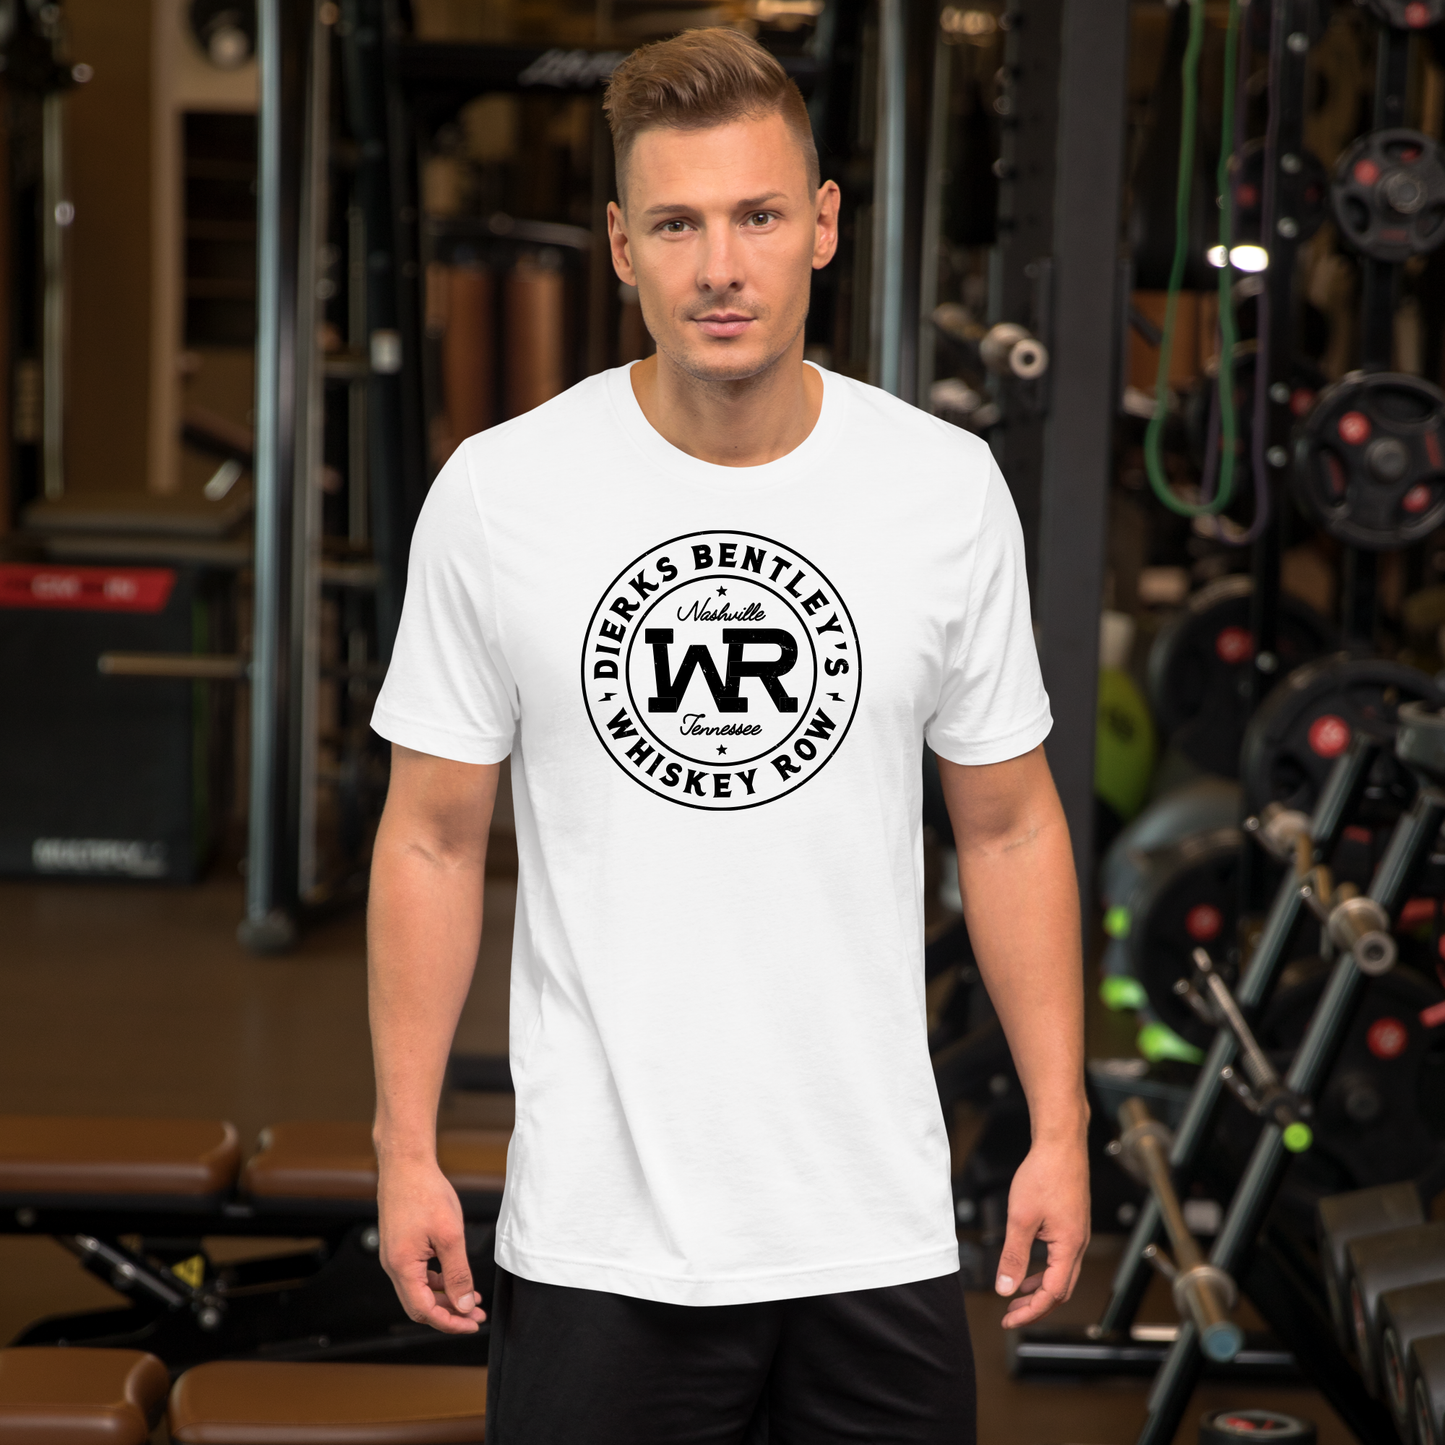 guy wearing Dierks Bentley Whiskey Row Crest Nashville White Tee at the gym